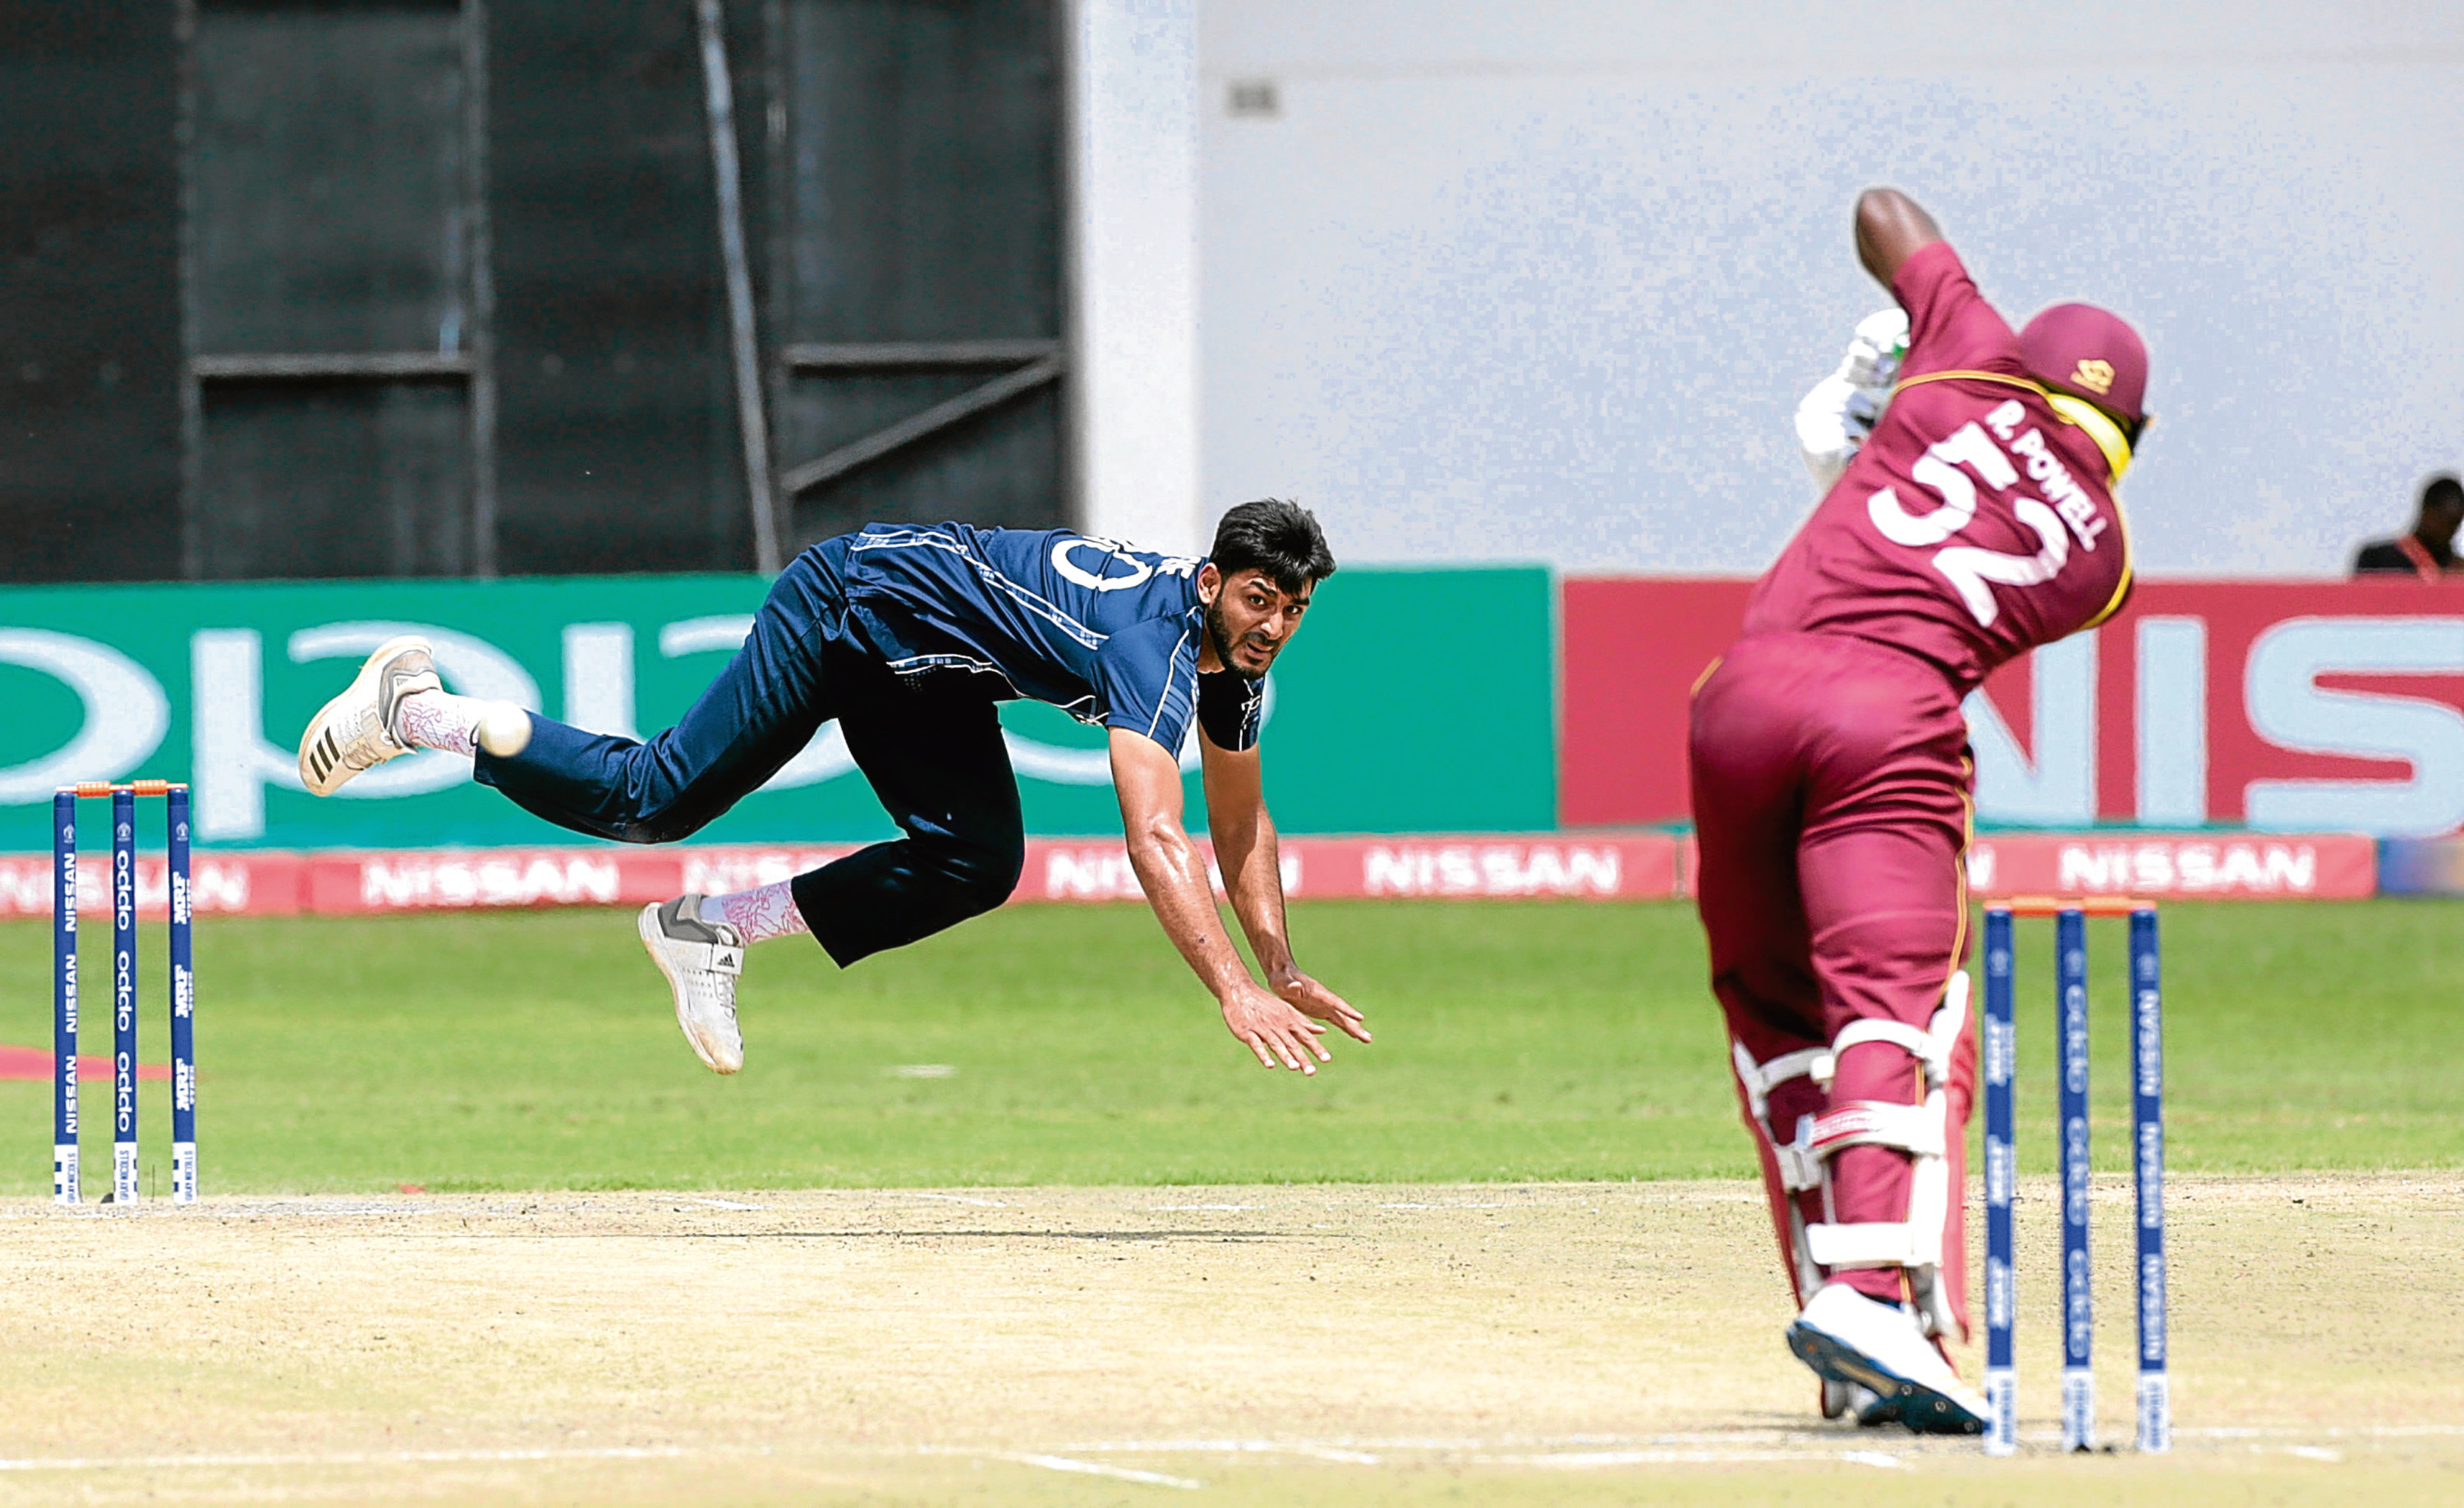 Scotland   bowler  Safyaan Sharif ,centre,  in action during their  cricket world cup qualifier match against West Indies at Harare  Sports Club, Wednesday, March, 21, 2018.Zimbabwe is playing  host to  the 2018  Cricket World Cup Qualifier matches  featuring  10 countries.(AP Photo/Tsvangirayi Mukwazhi)